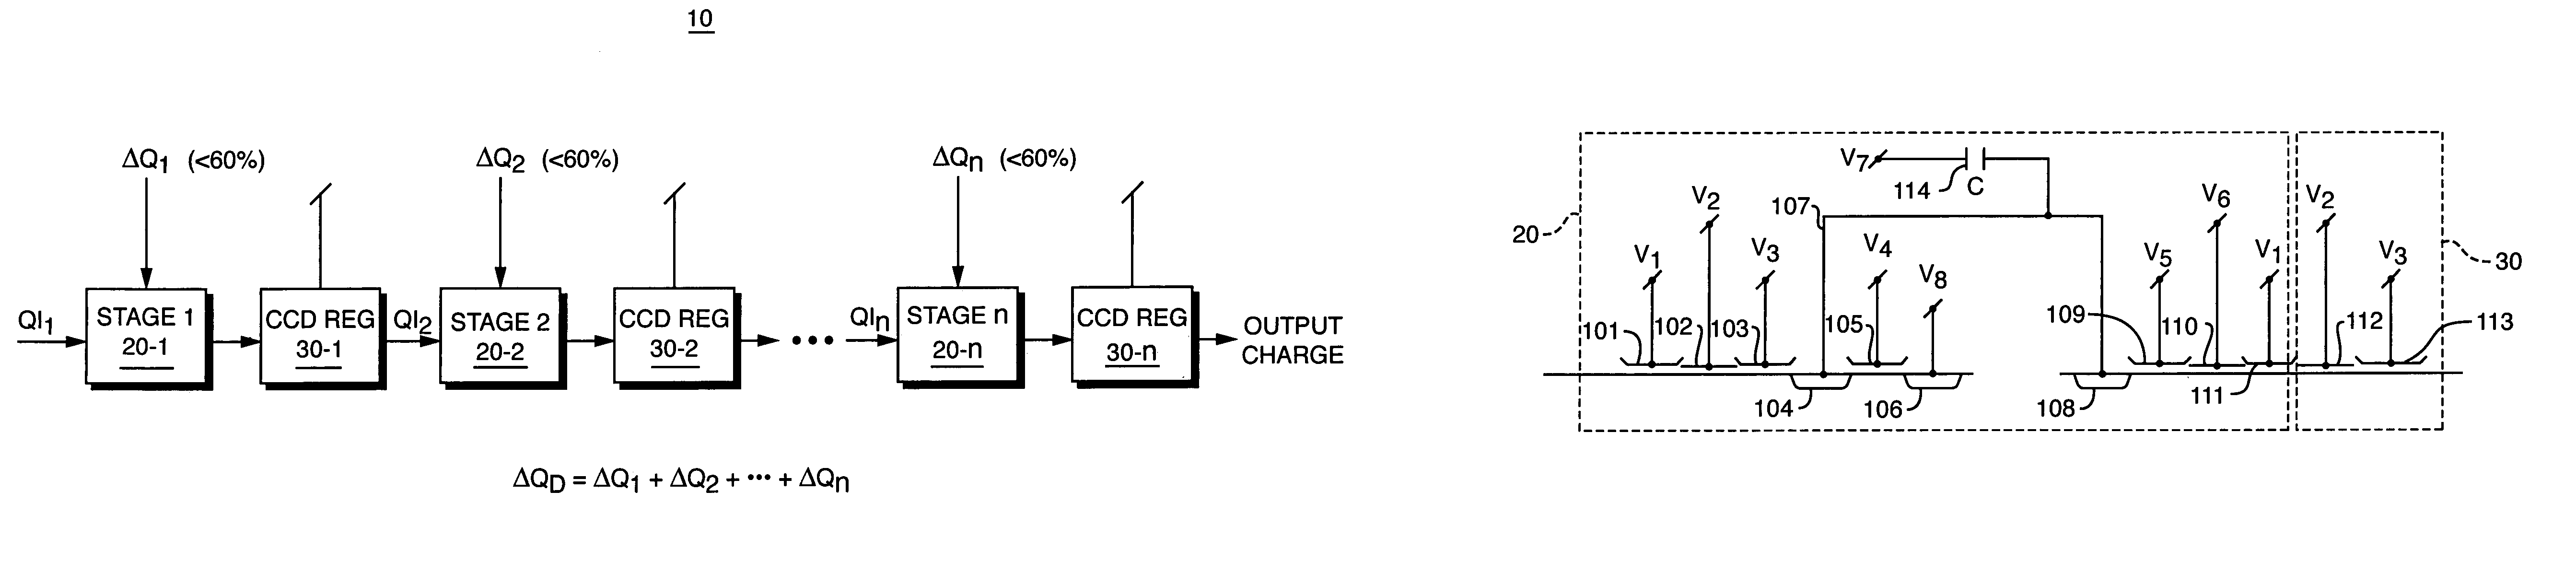 Device for subtracting or adding a constant amount of charge in a charge-coupled device at high operating frequencies